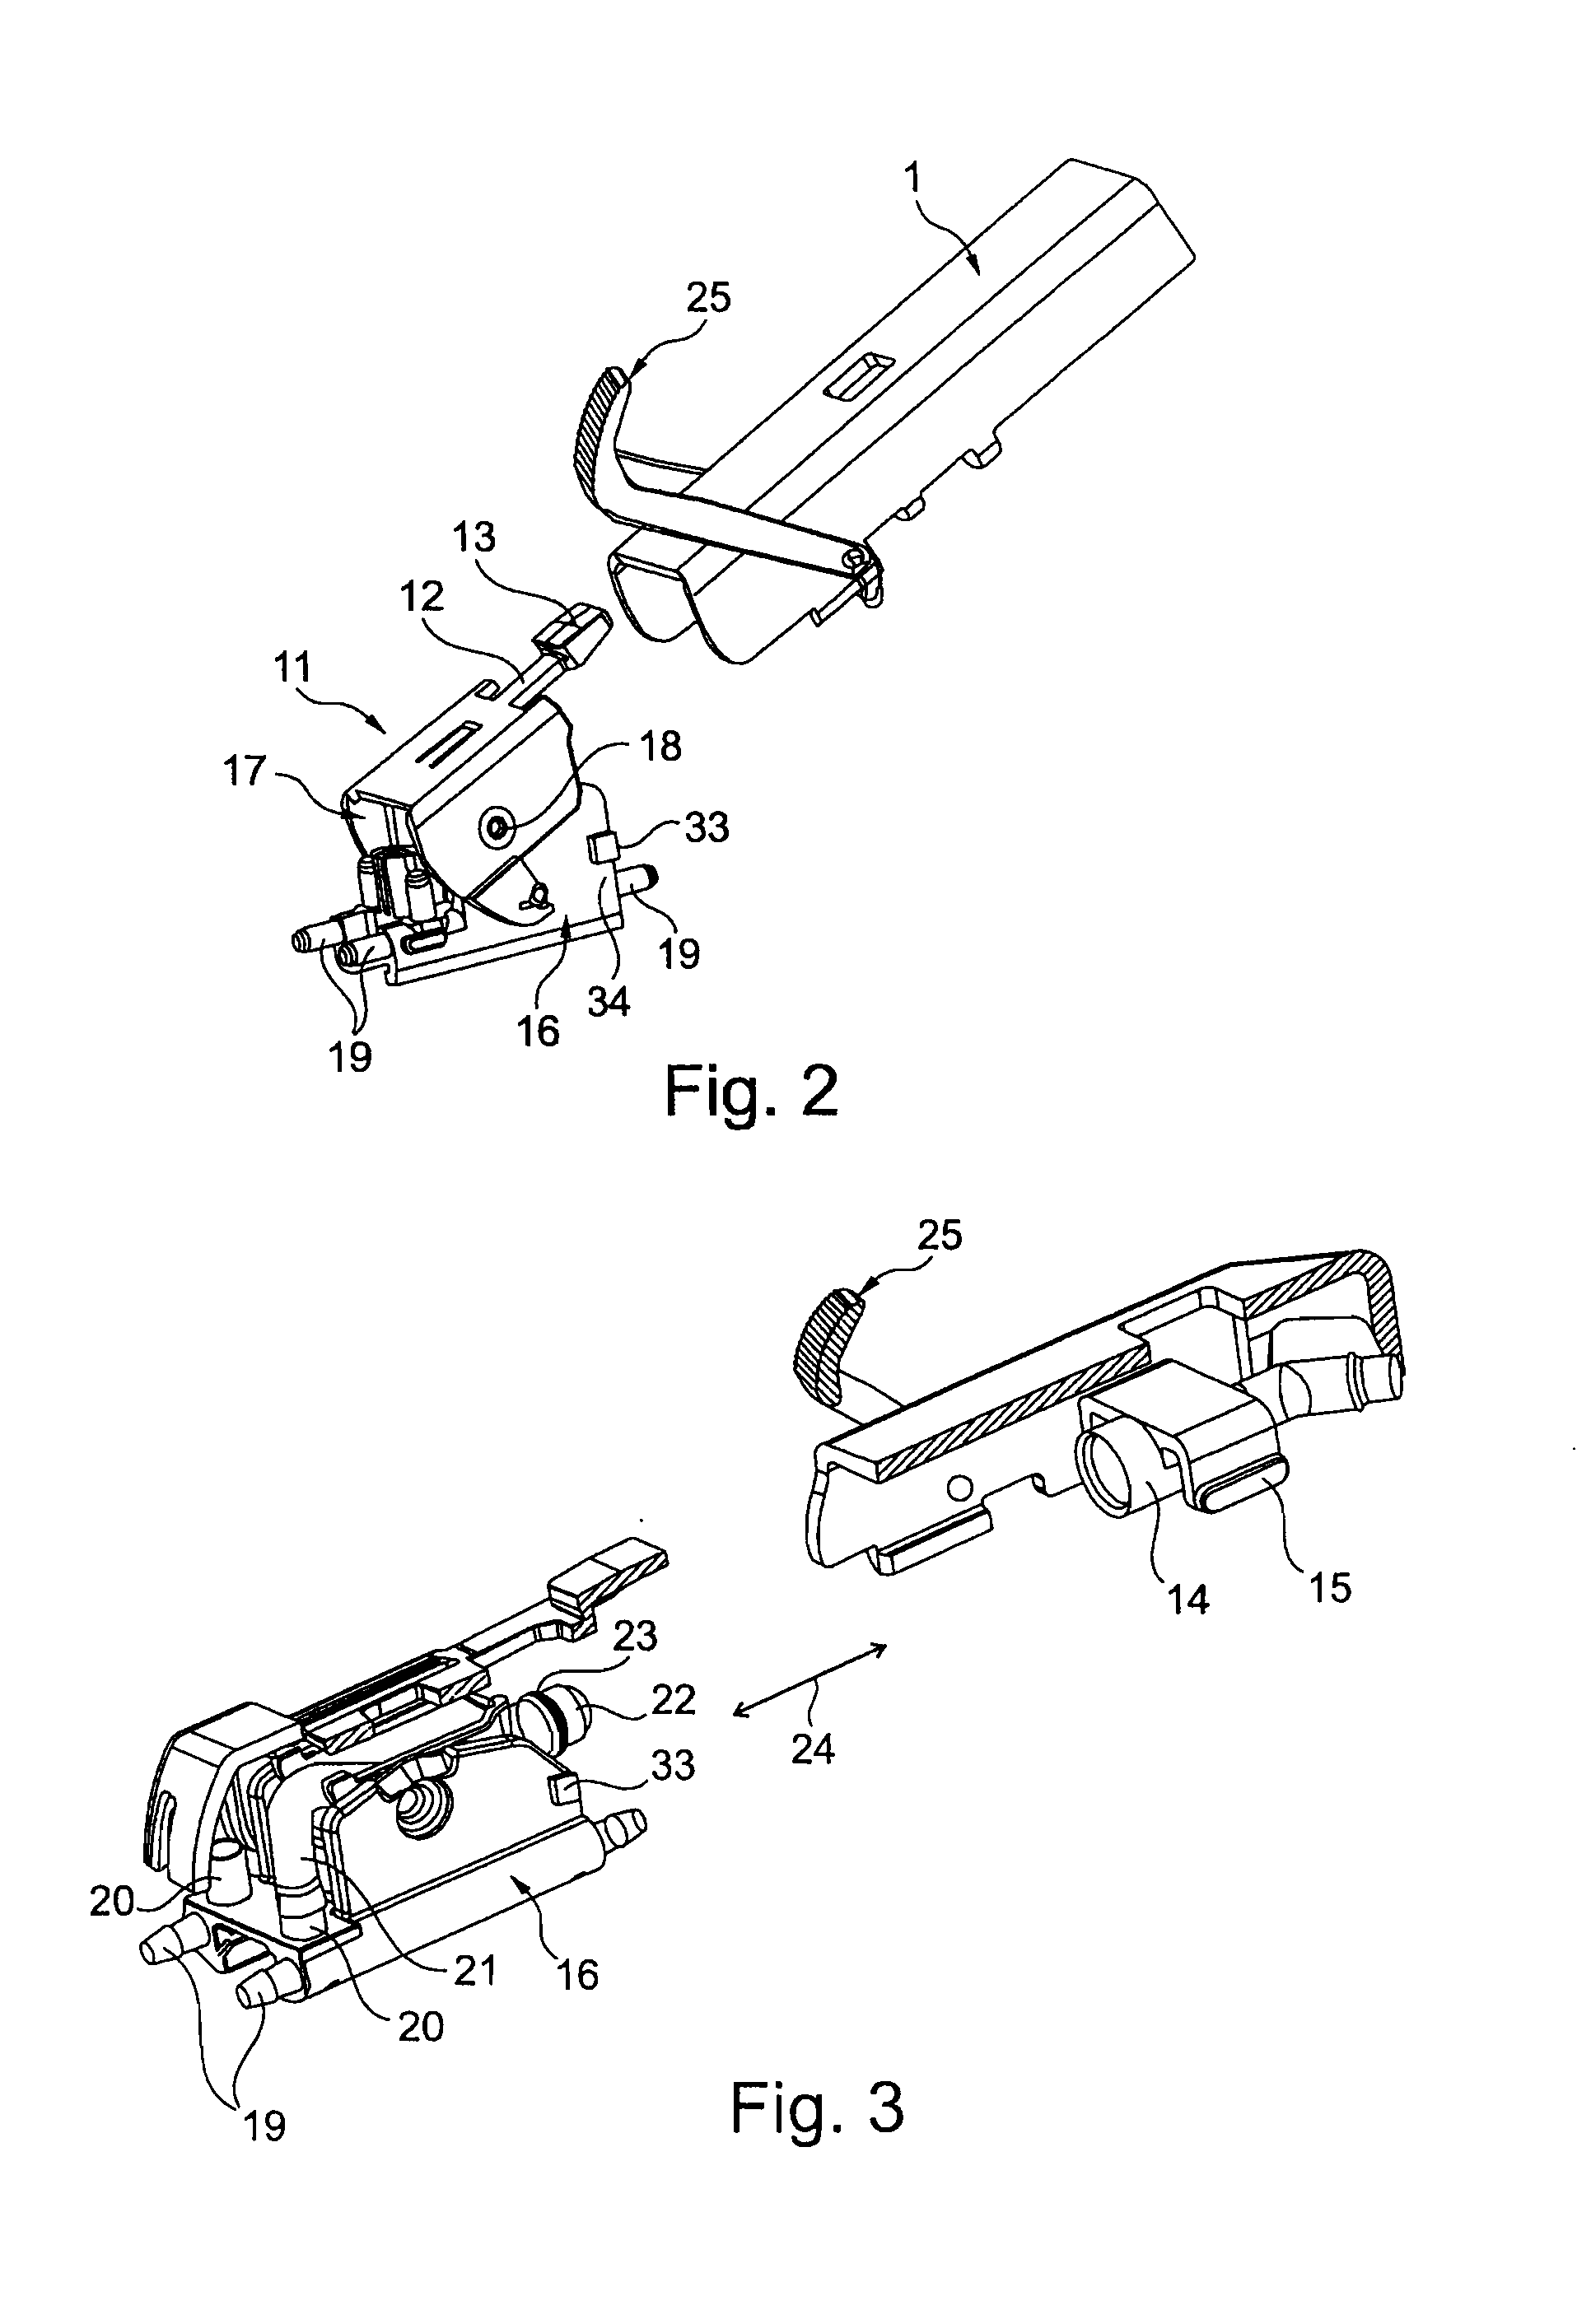 Wiper Blade for Cleaning Windows of Motor Vehicles and Wiper Arm